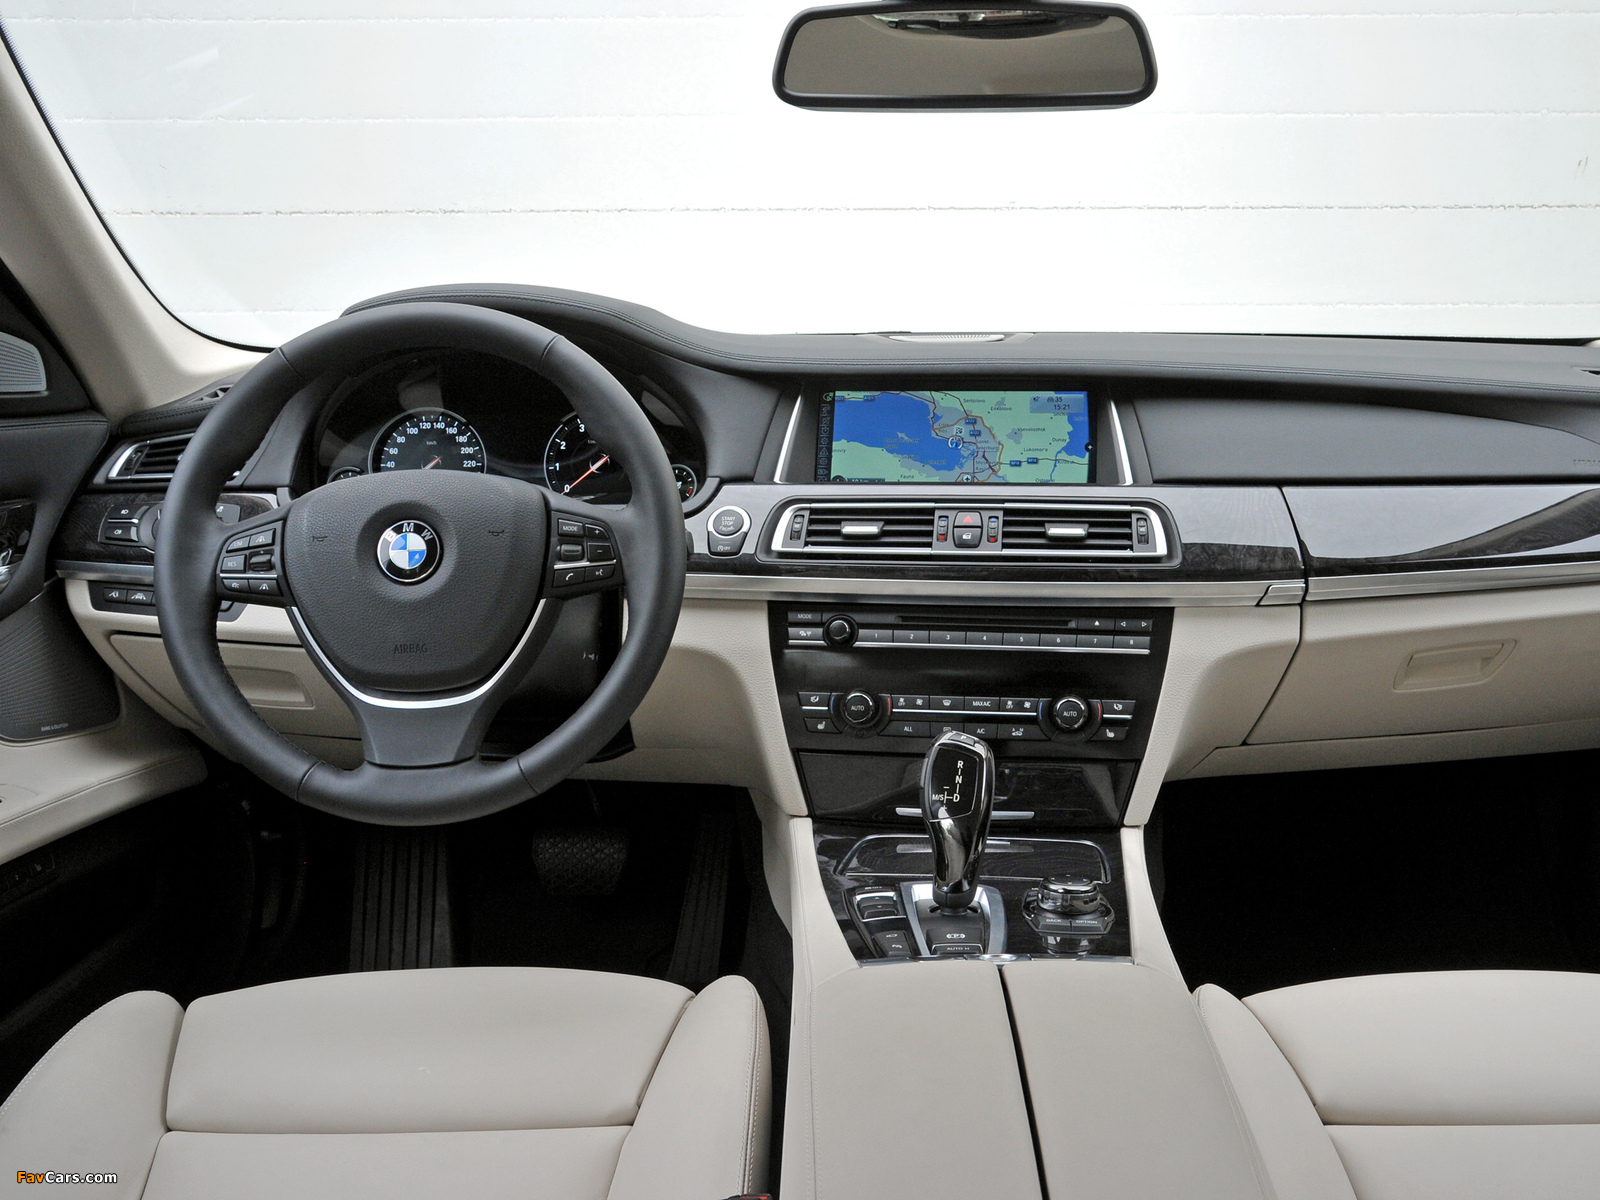 BMW 750i (F01) 2012 wallpapers (1600 x 1200)